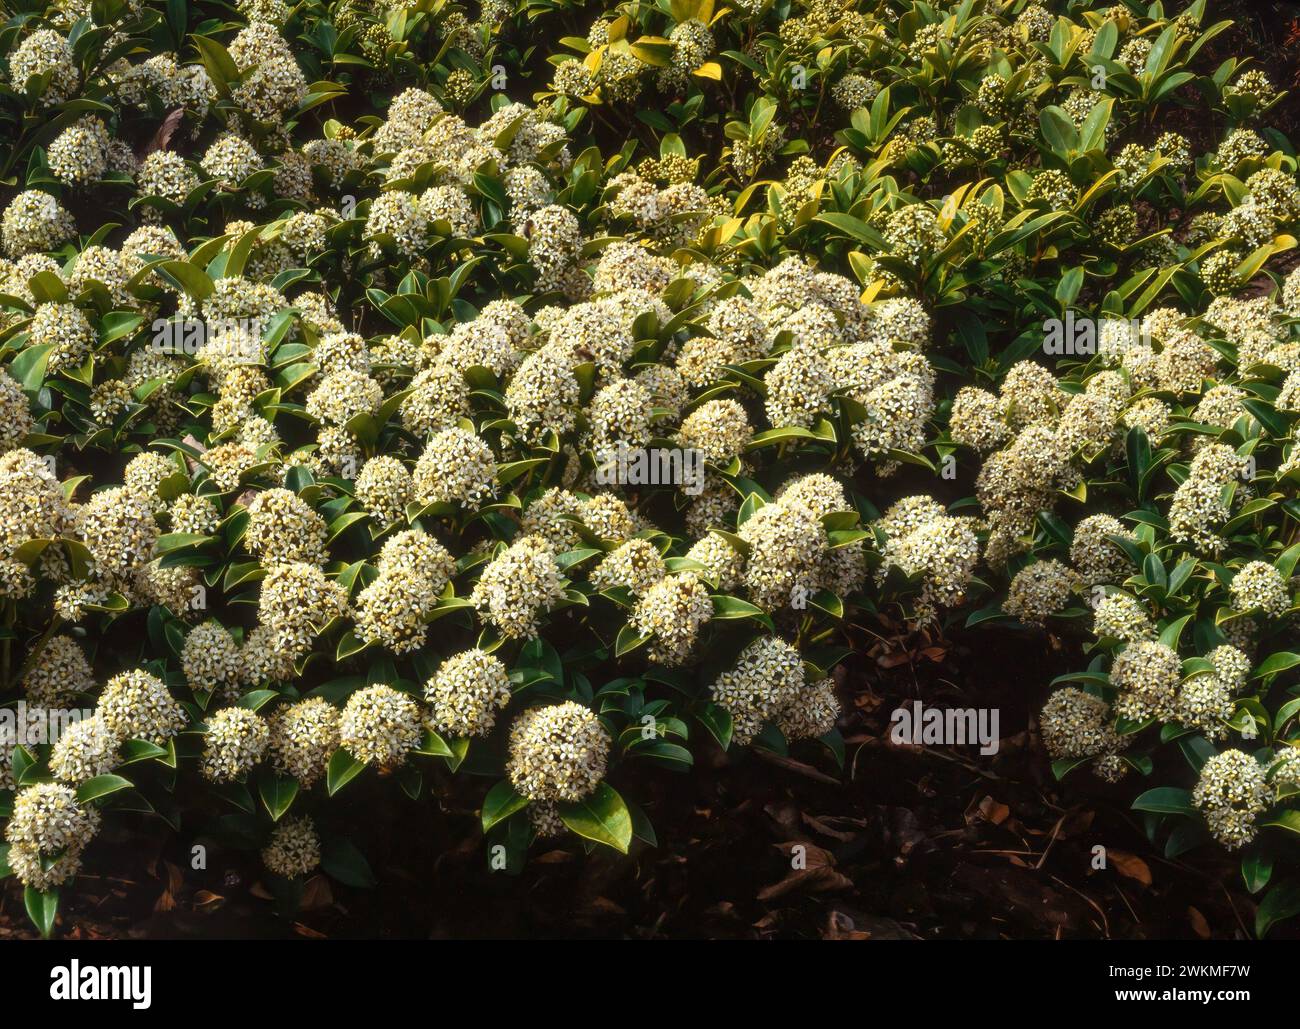 Skimmia Japonica evergreen shrub covered in white blossom flowers in spring growing in English garden, England, UK Stock Photo